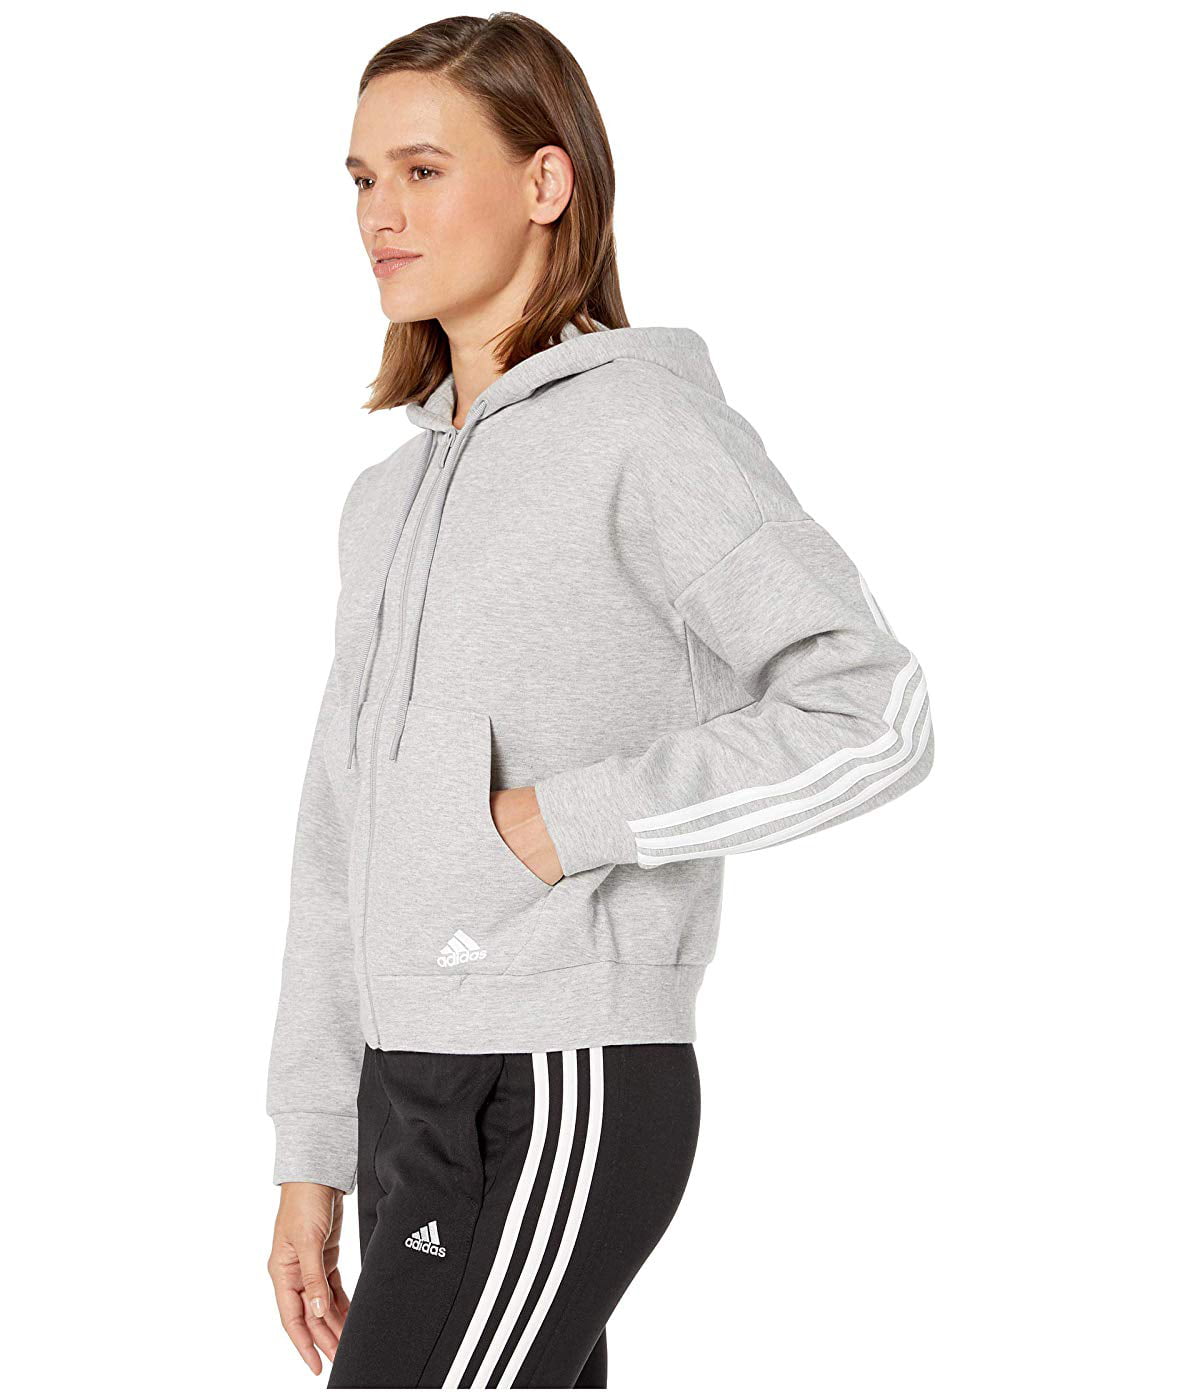 adidas Have Full Heather/White Zip Medium Double Knit Hoodie Must Grey